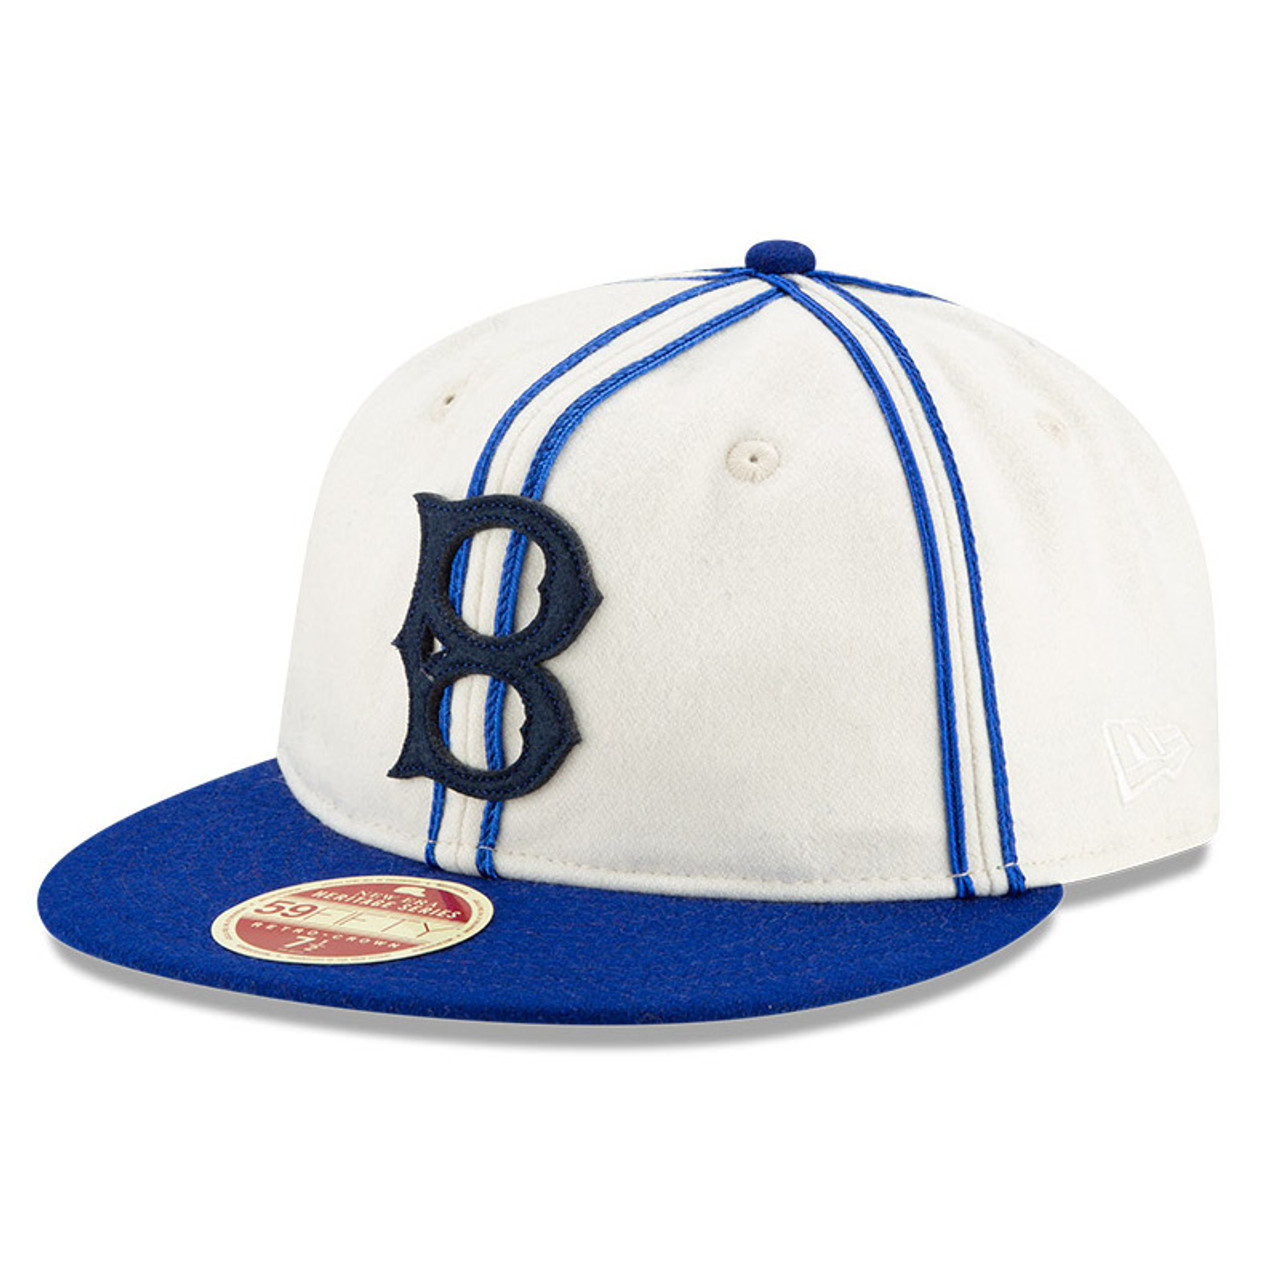 BROOKLYN DODGERS 1937 THROWBACK JERSEY